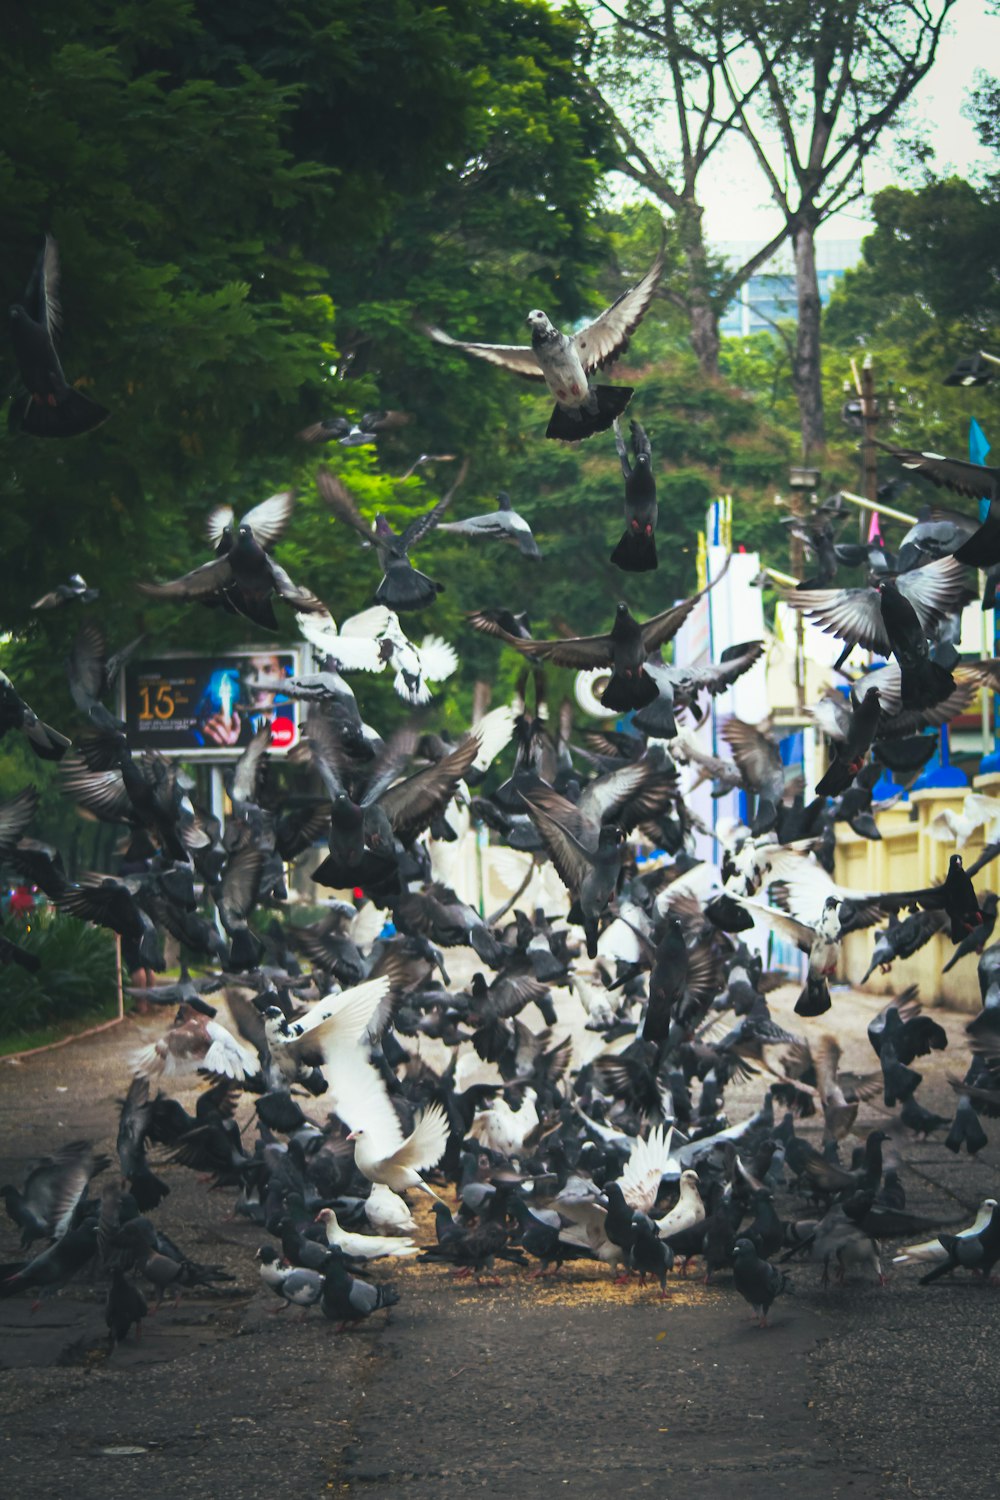 a large flock of birds flying over a street